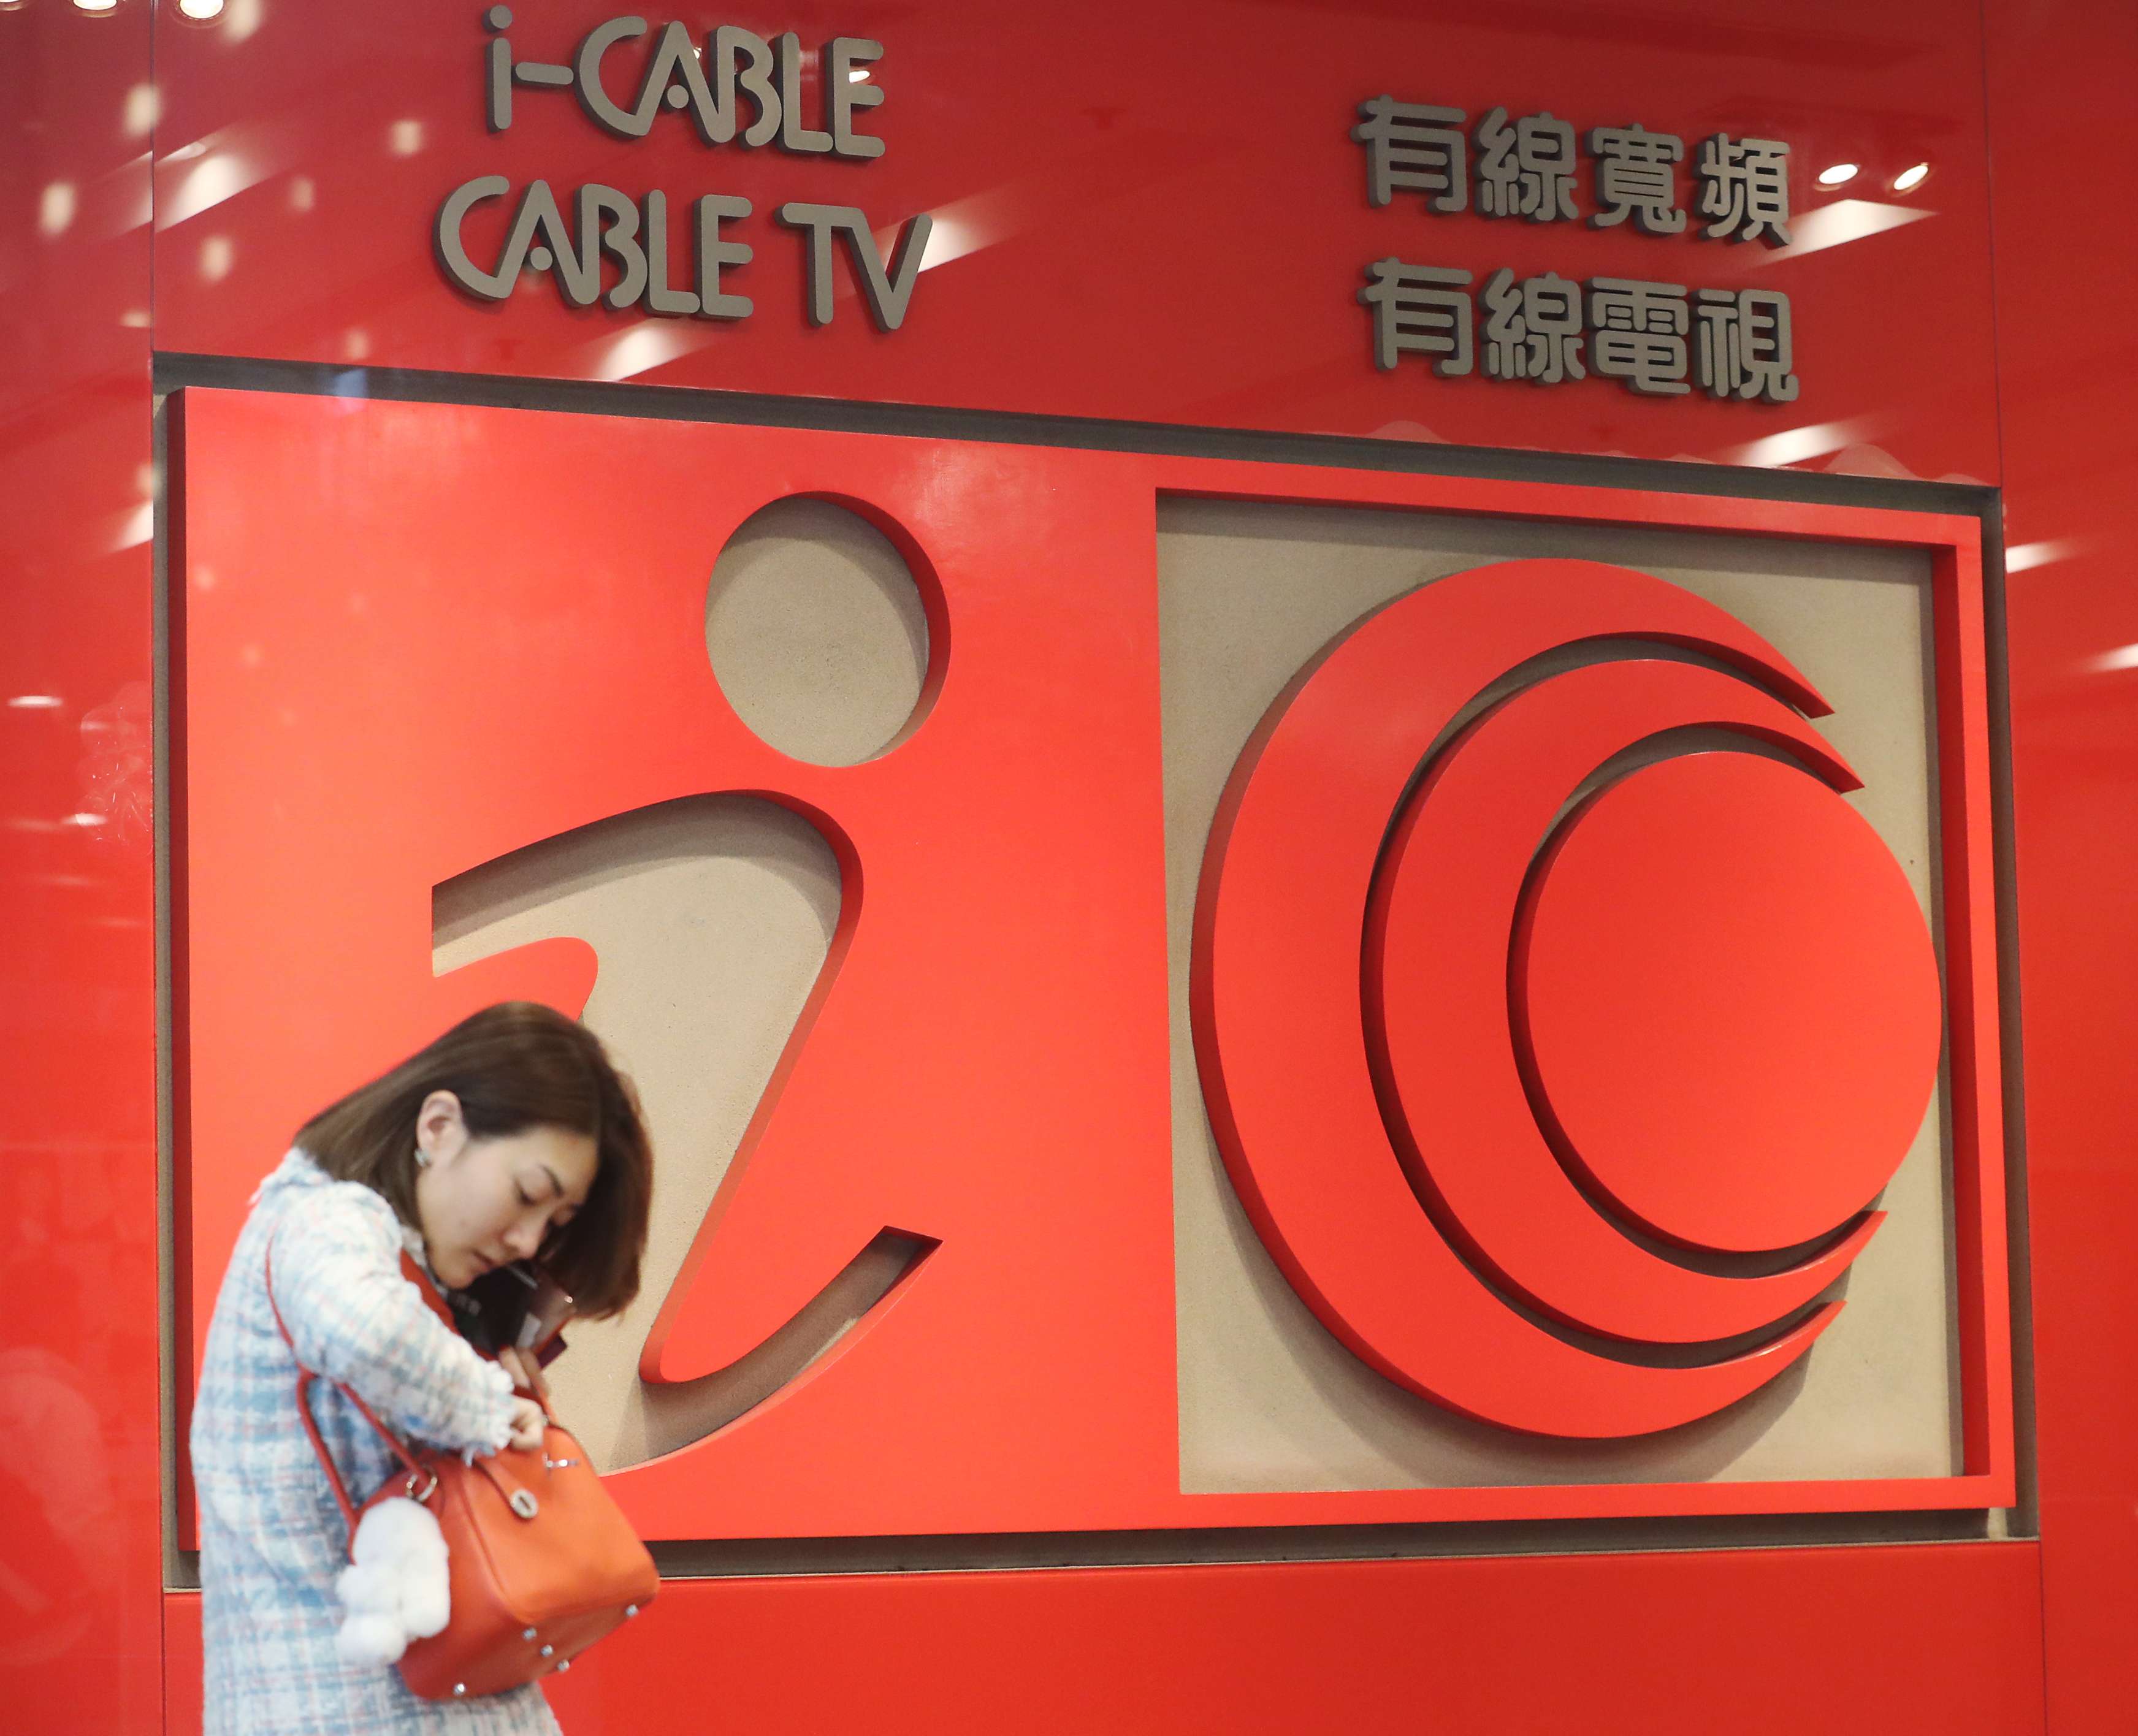 i-Cable Communications has been seeking new investors ahead of an April 26 deadline to renew its license. Photo: Edward Wong